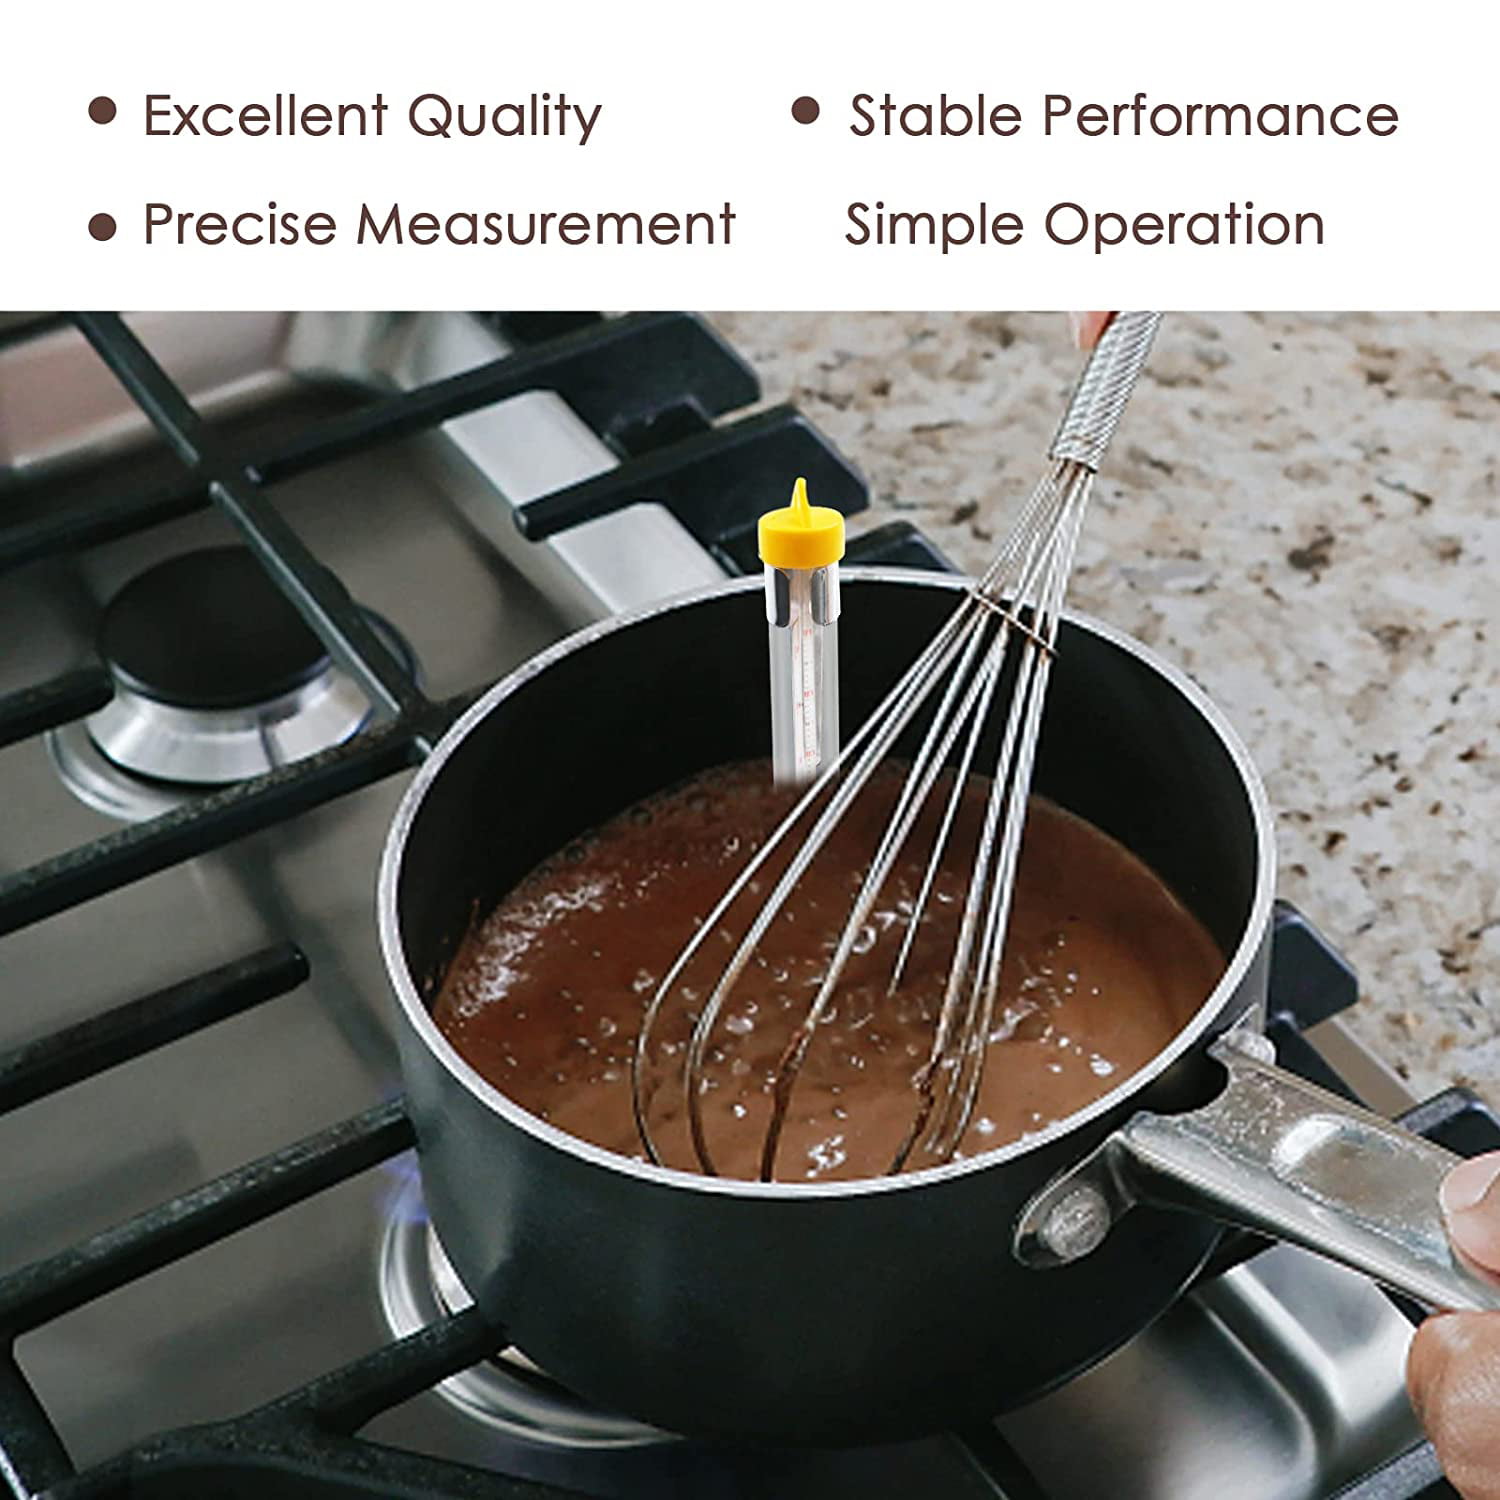 Candy Thermometer Deep Fry/Jam/Sugar/Syrup/Jelly Thermometer with Hanging  Hook & Pot Clip Stainless Steel Cooking Food Thermometer Quick Reference